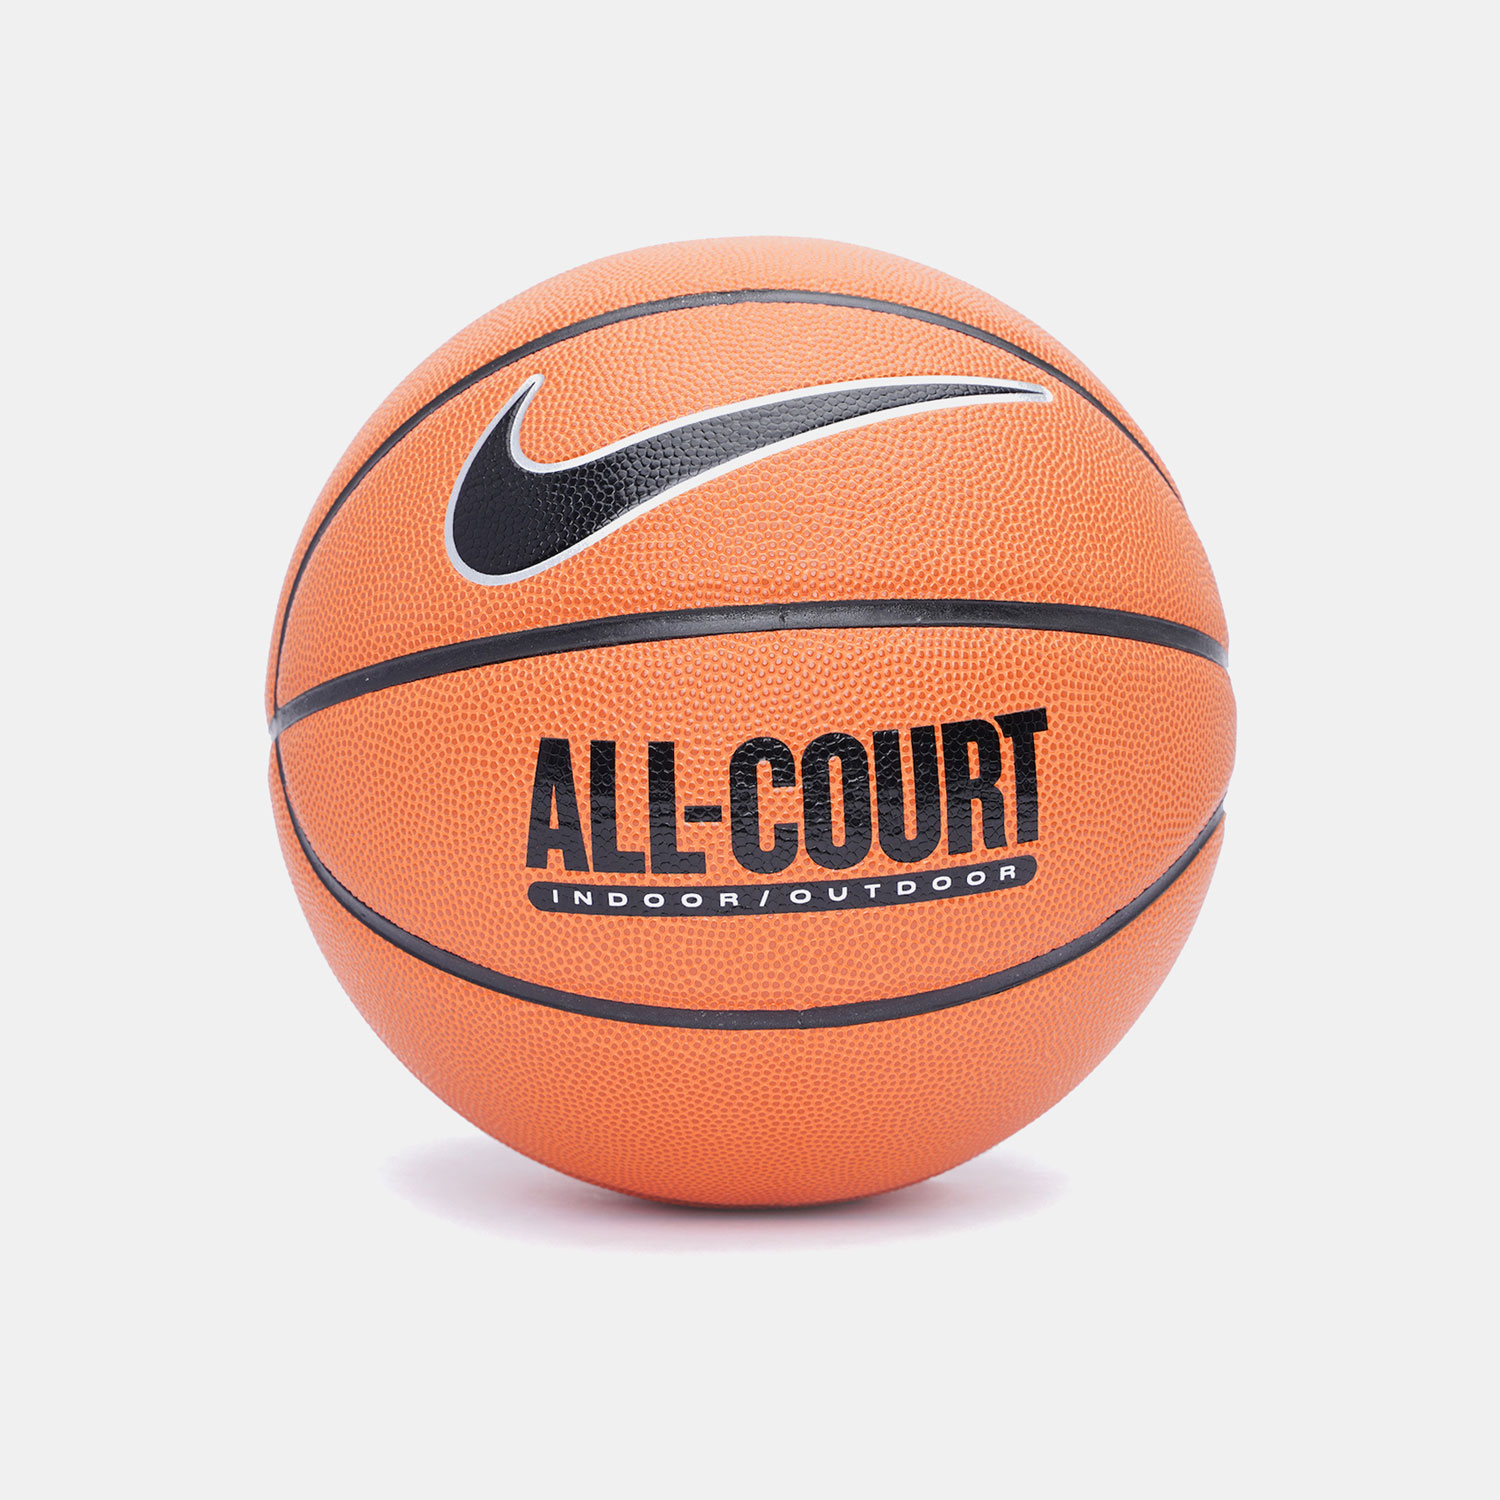 NIKE EVERYDAY ALL COURT BASKET BALL ΠΟΡΤΟΚΑΛΙ